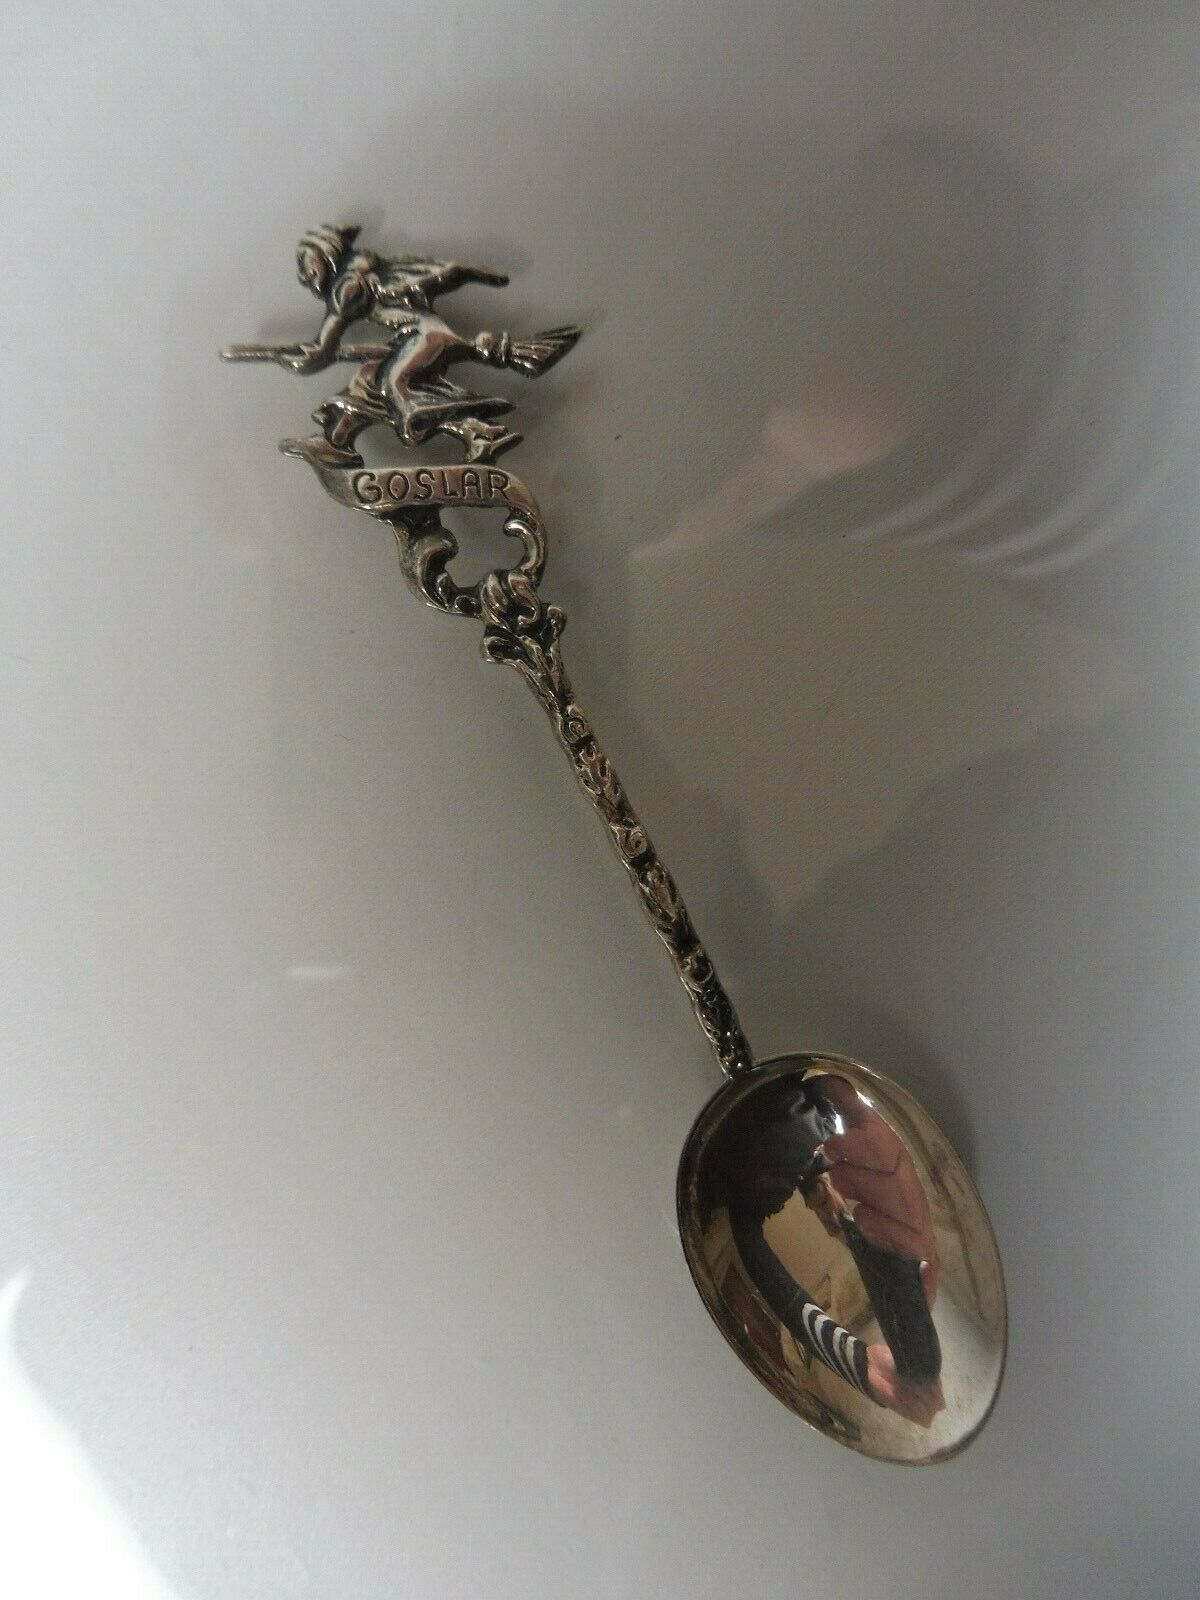 Old Decorative Spoon, 835 Silver, With Witch, Goslar, Silver Spoon